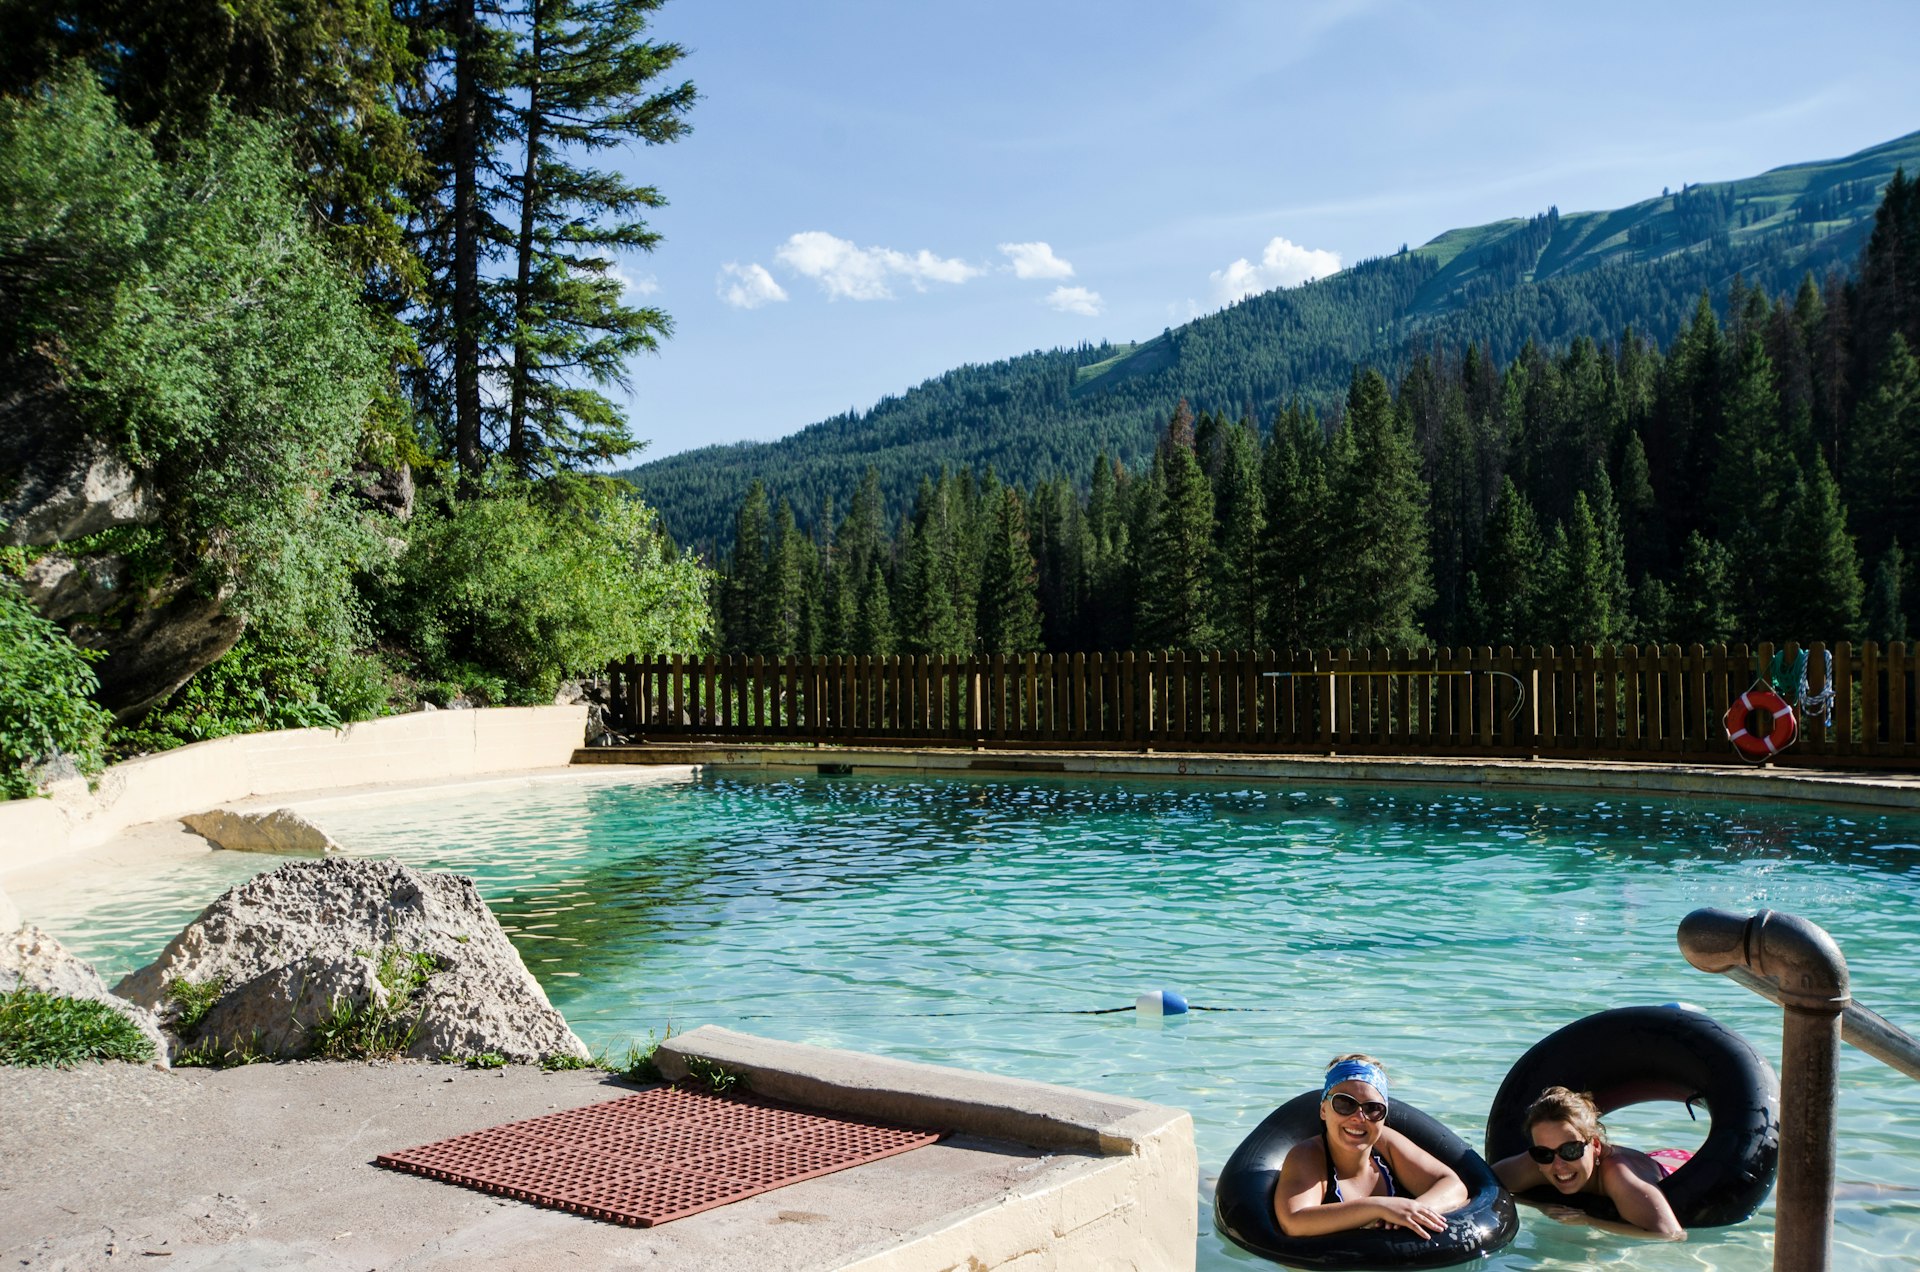 Two women in black rubber rings in an artificial pool fed by hot springs in Wyoming